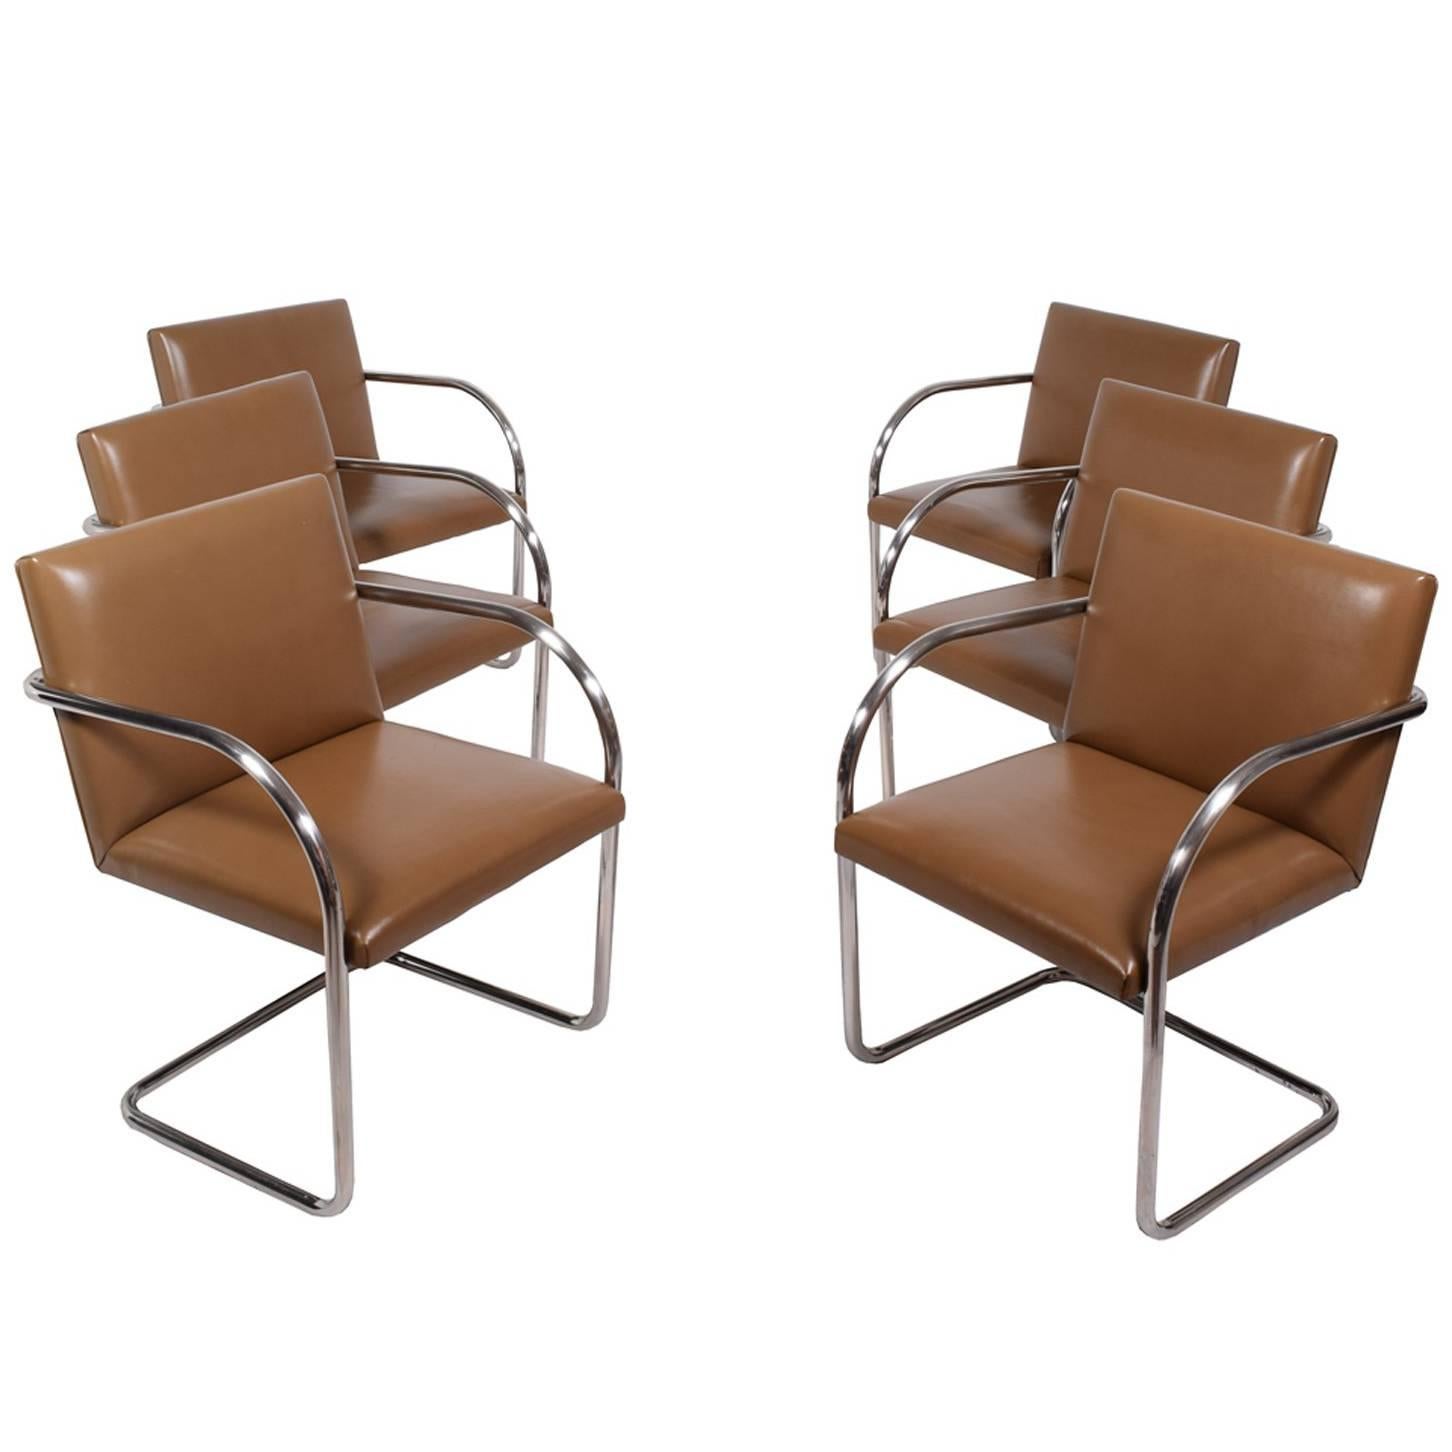 Set of Six Brno Chairs by Mies van der Rohe for Knoll